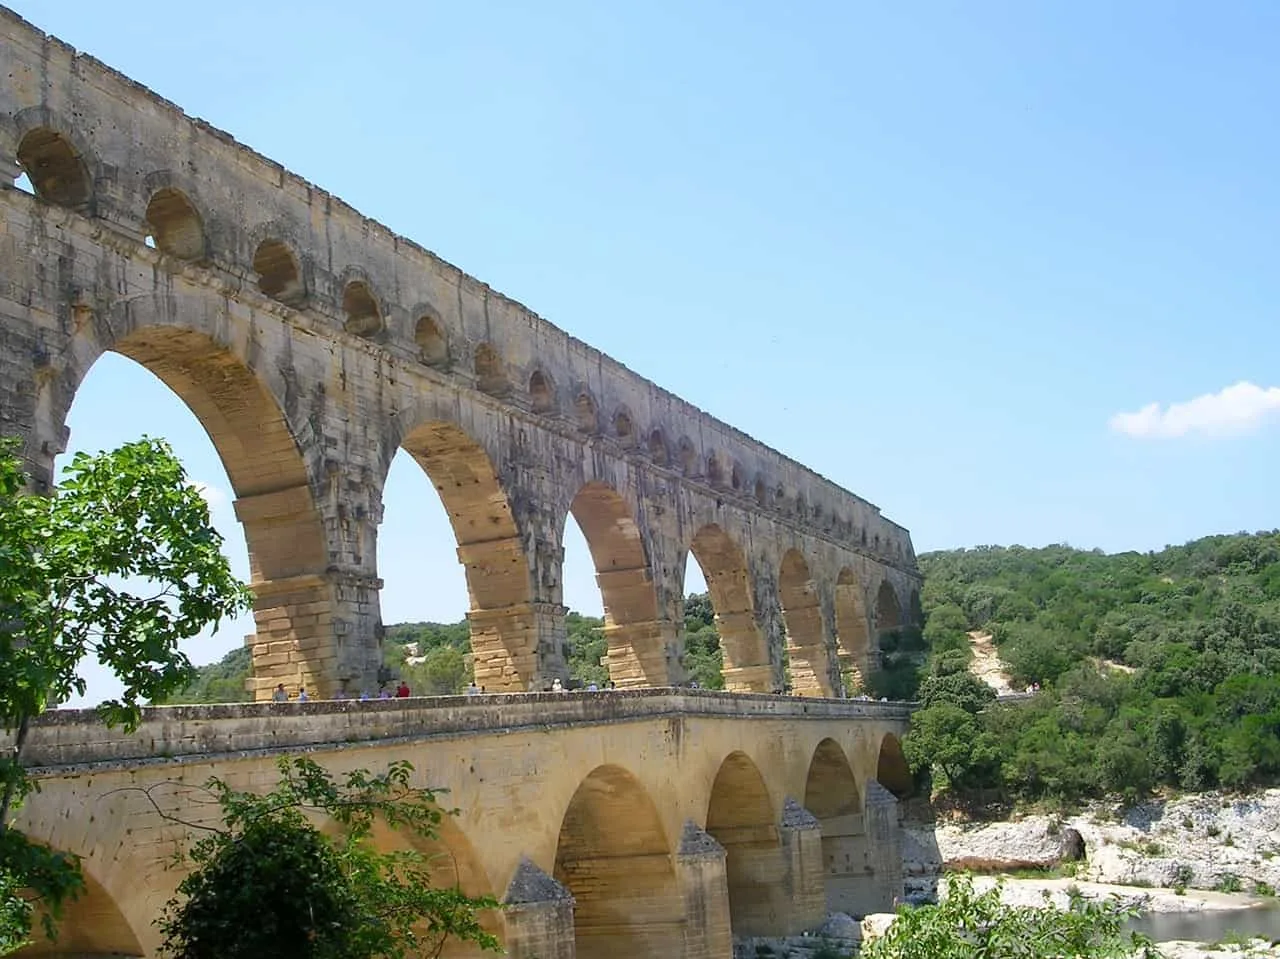 Sideview of the Pont du Gard